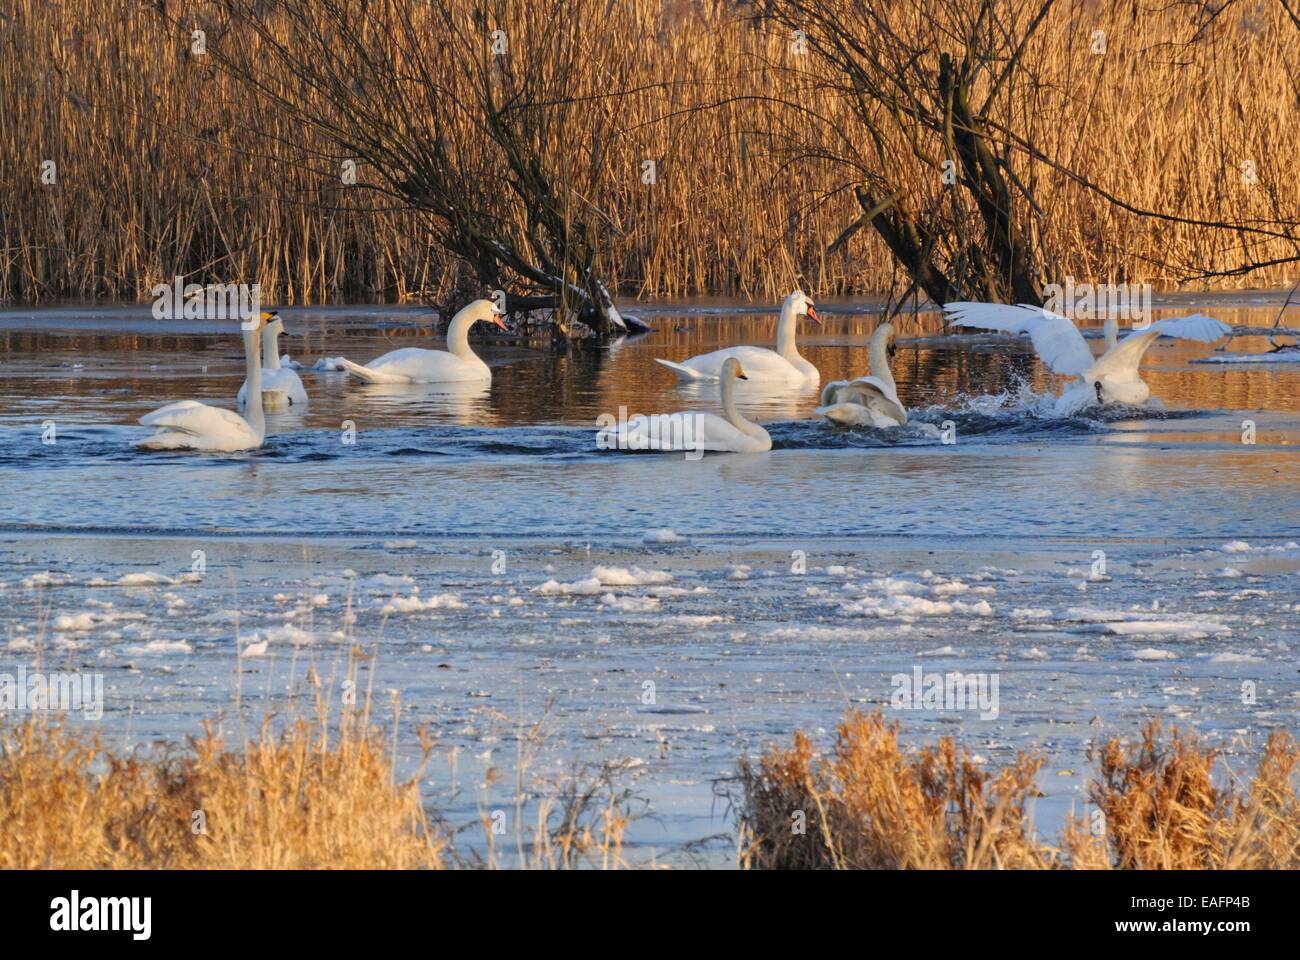 Whooper swans (Cygnus cygnus) and mute swans (Cygnus olor), Lower Oder Valley National Park, Germany Stock Photo